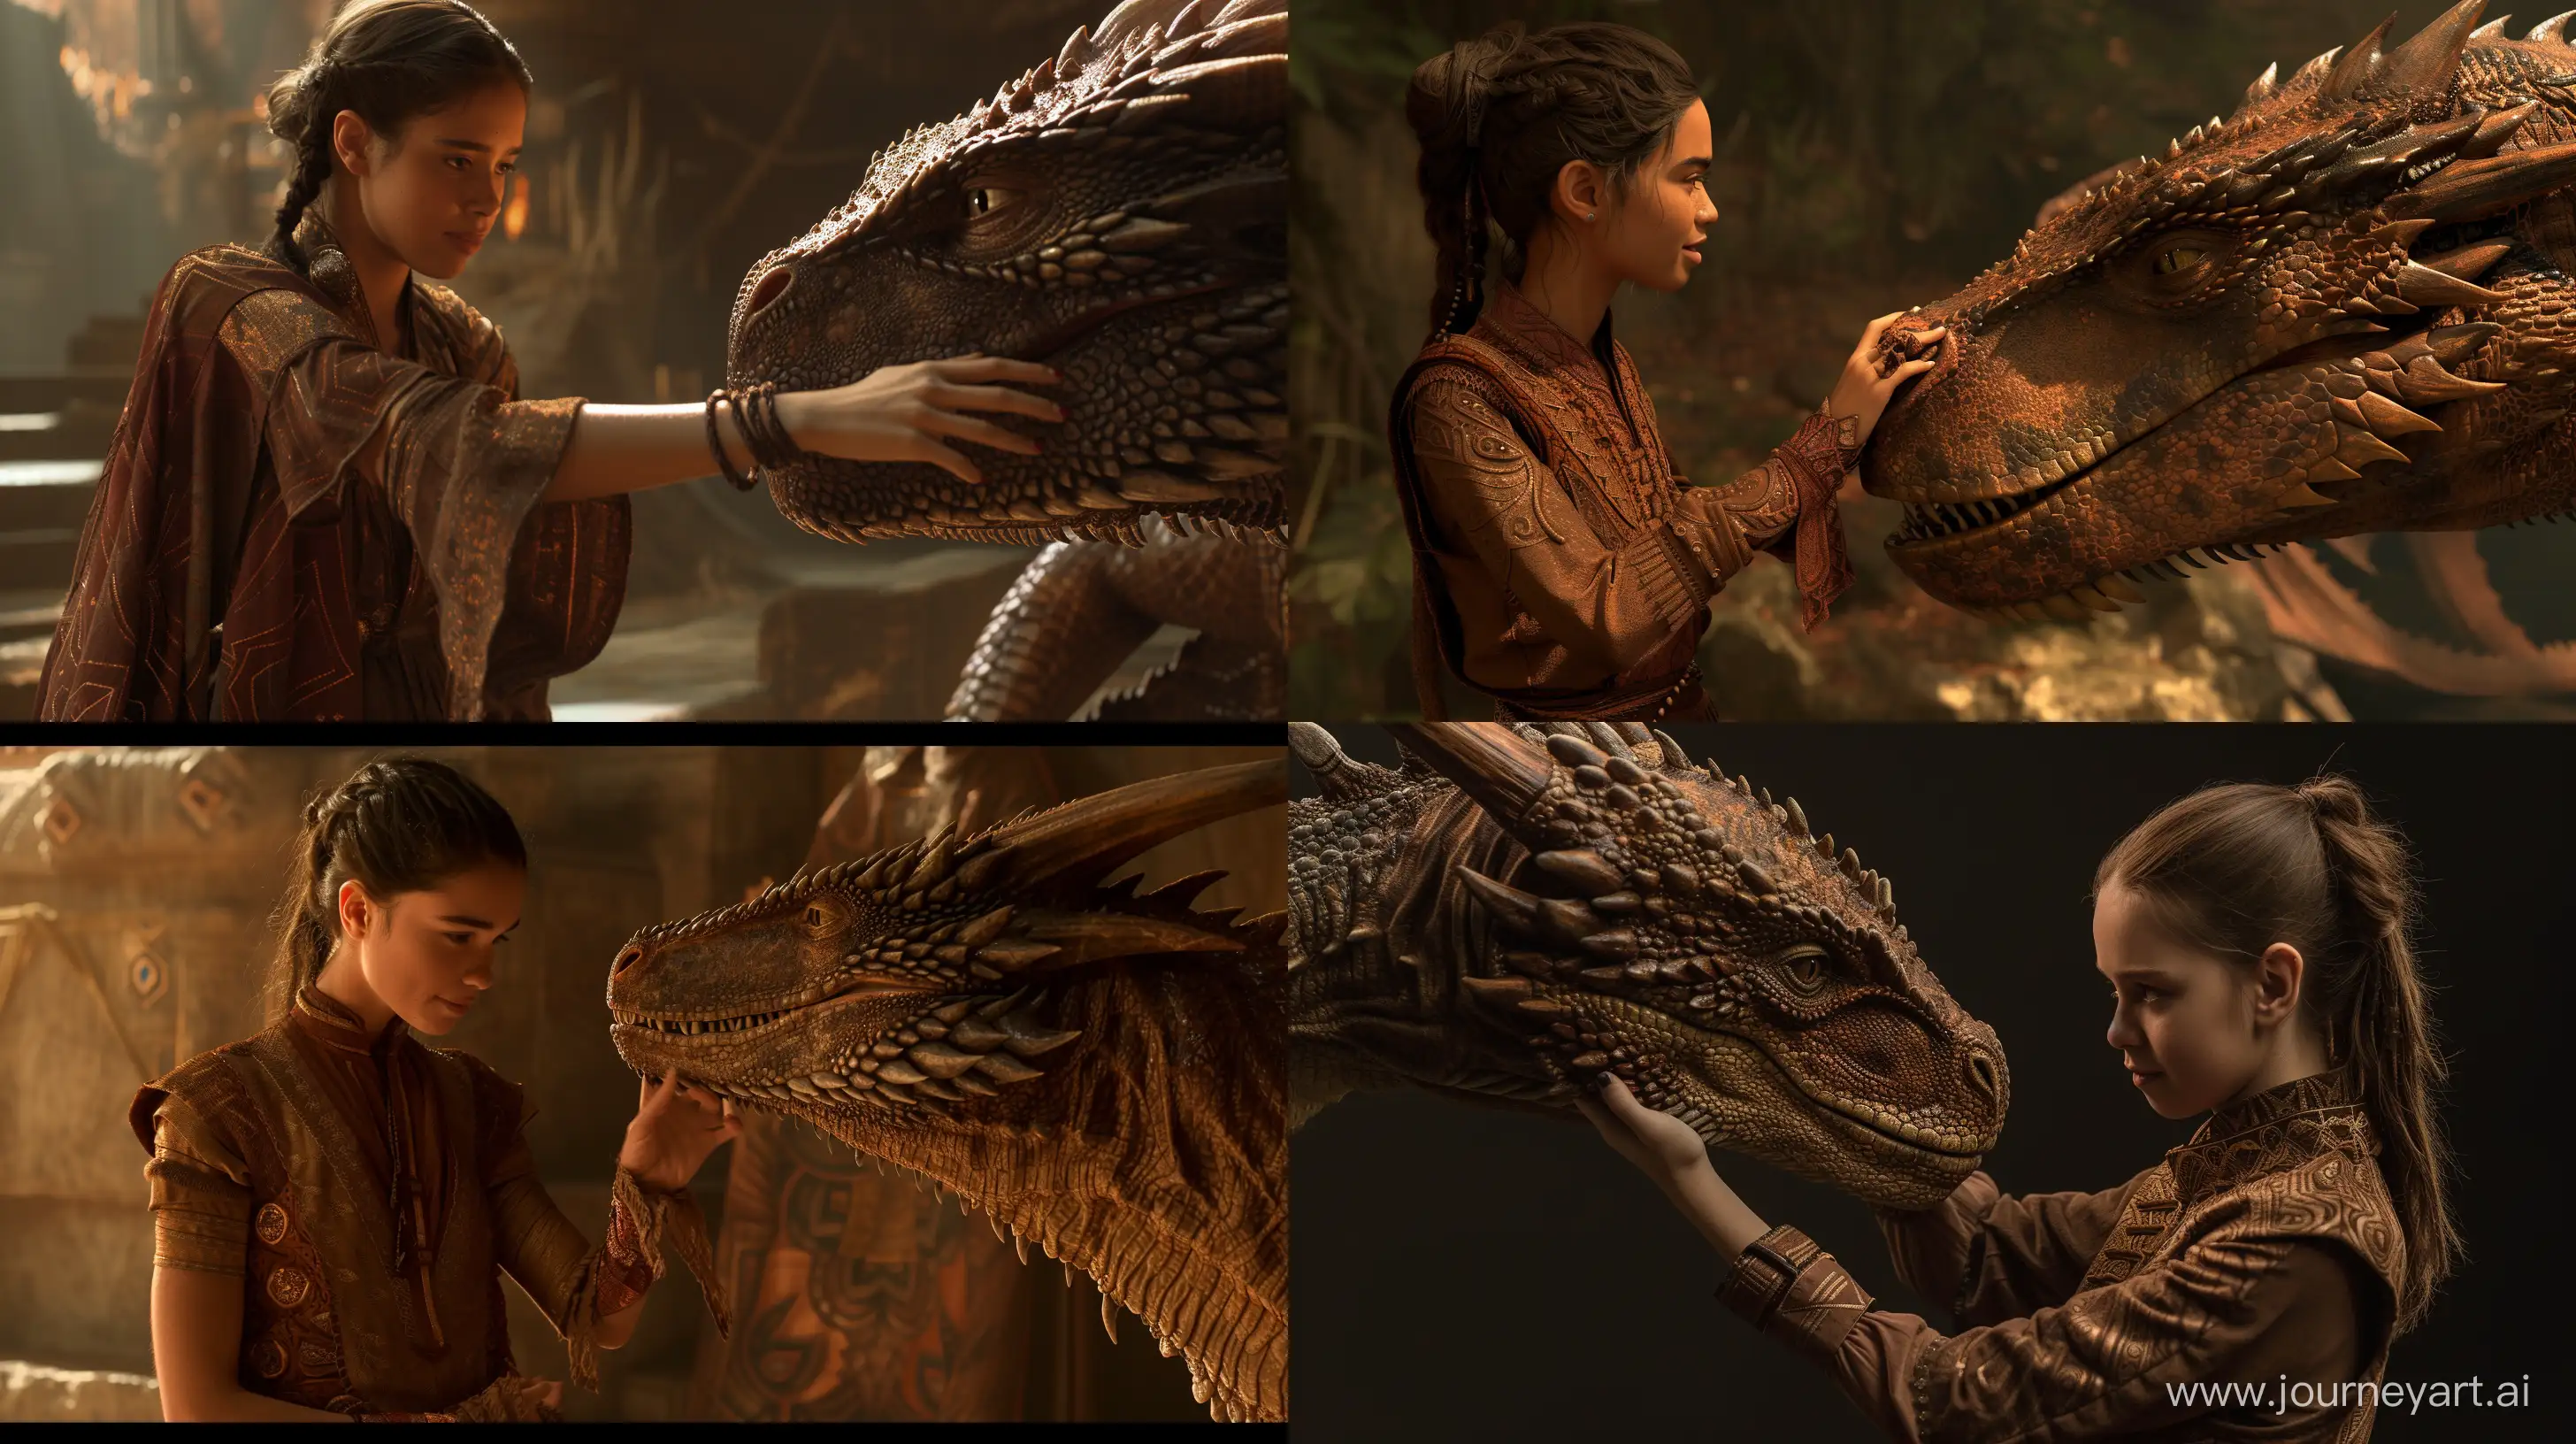 Young-Woman-in-Brown-Clothing-Petting-Hyperrealistic-Dragon